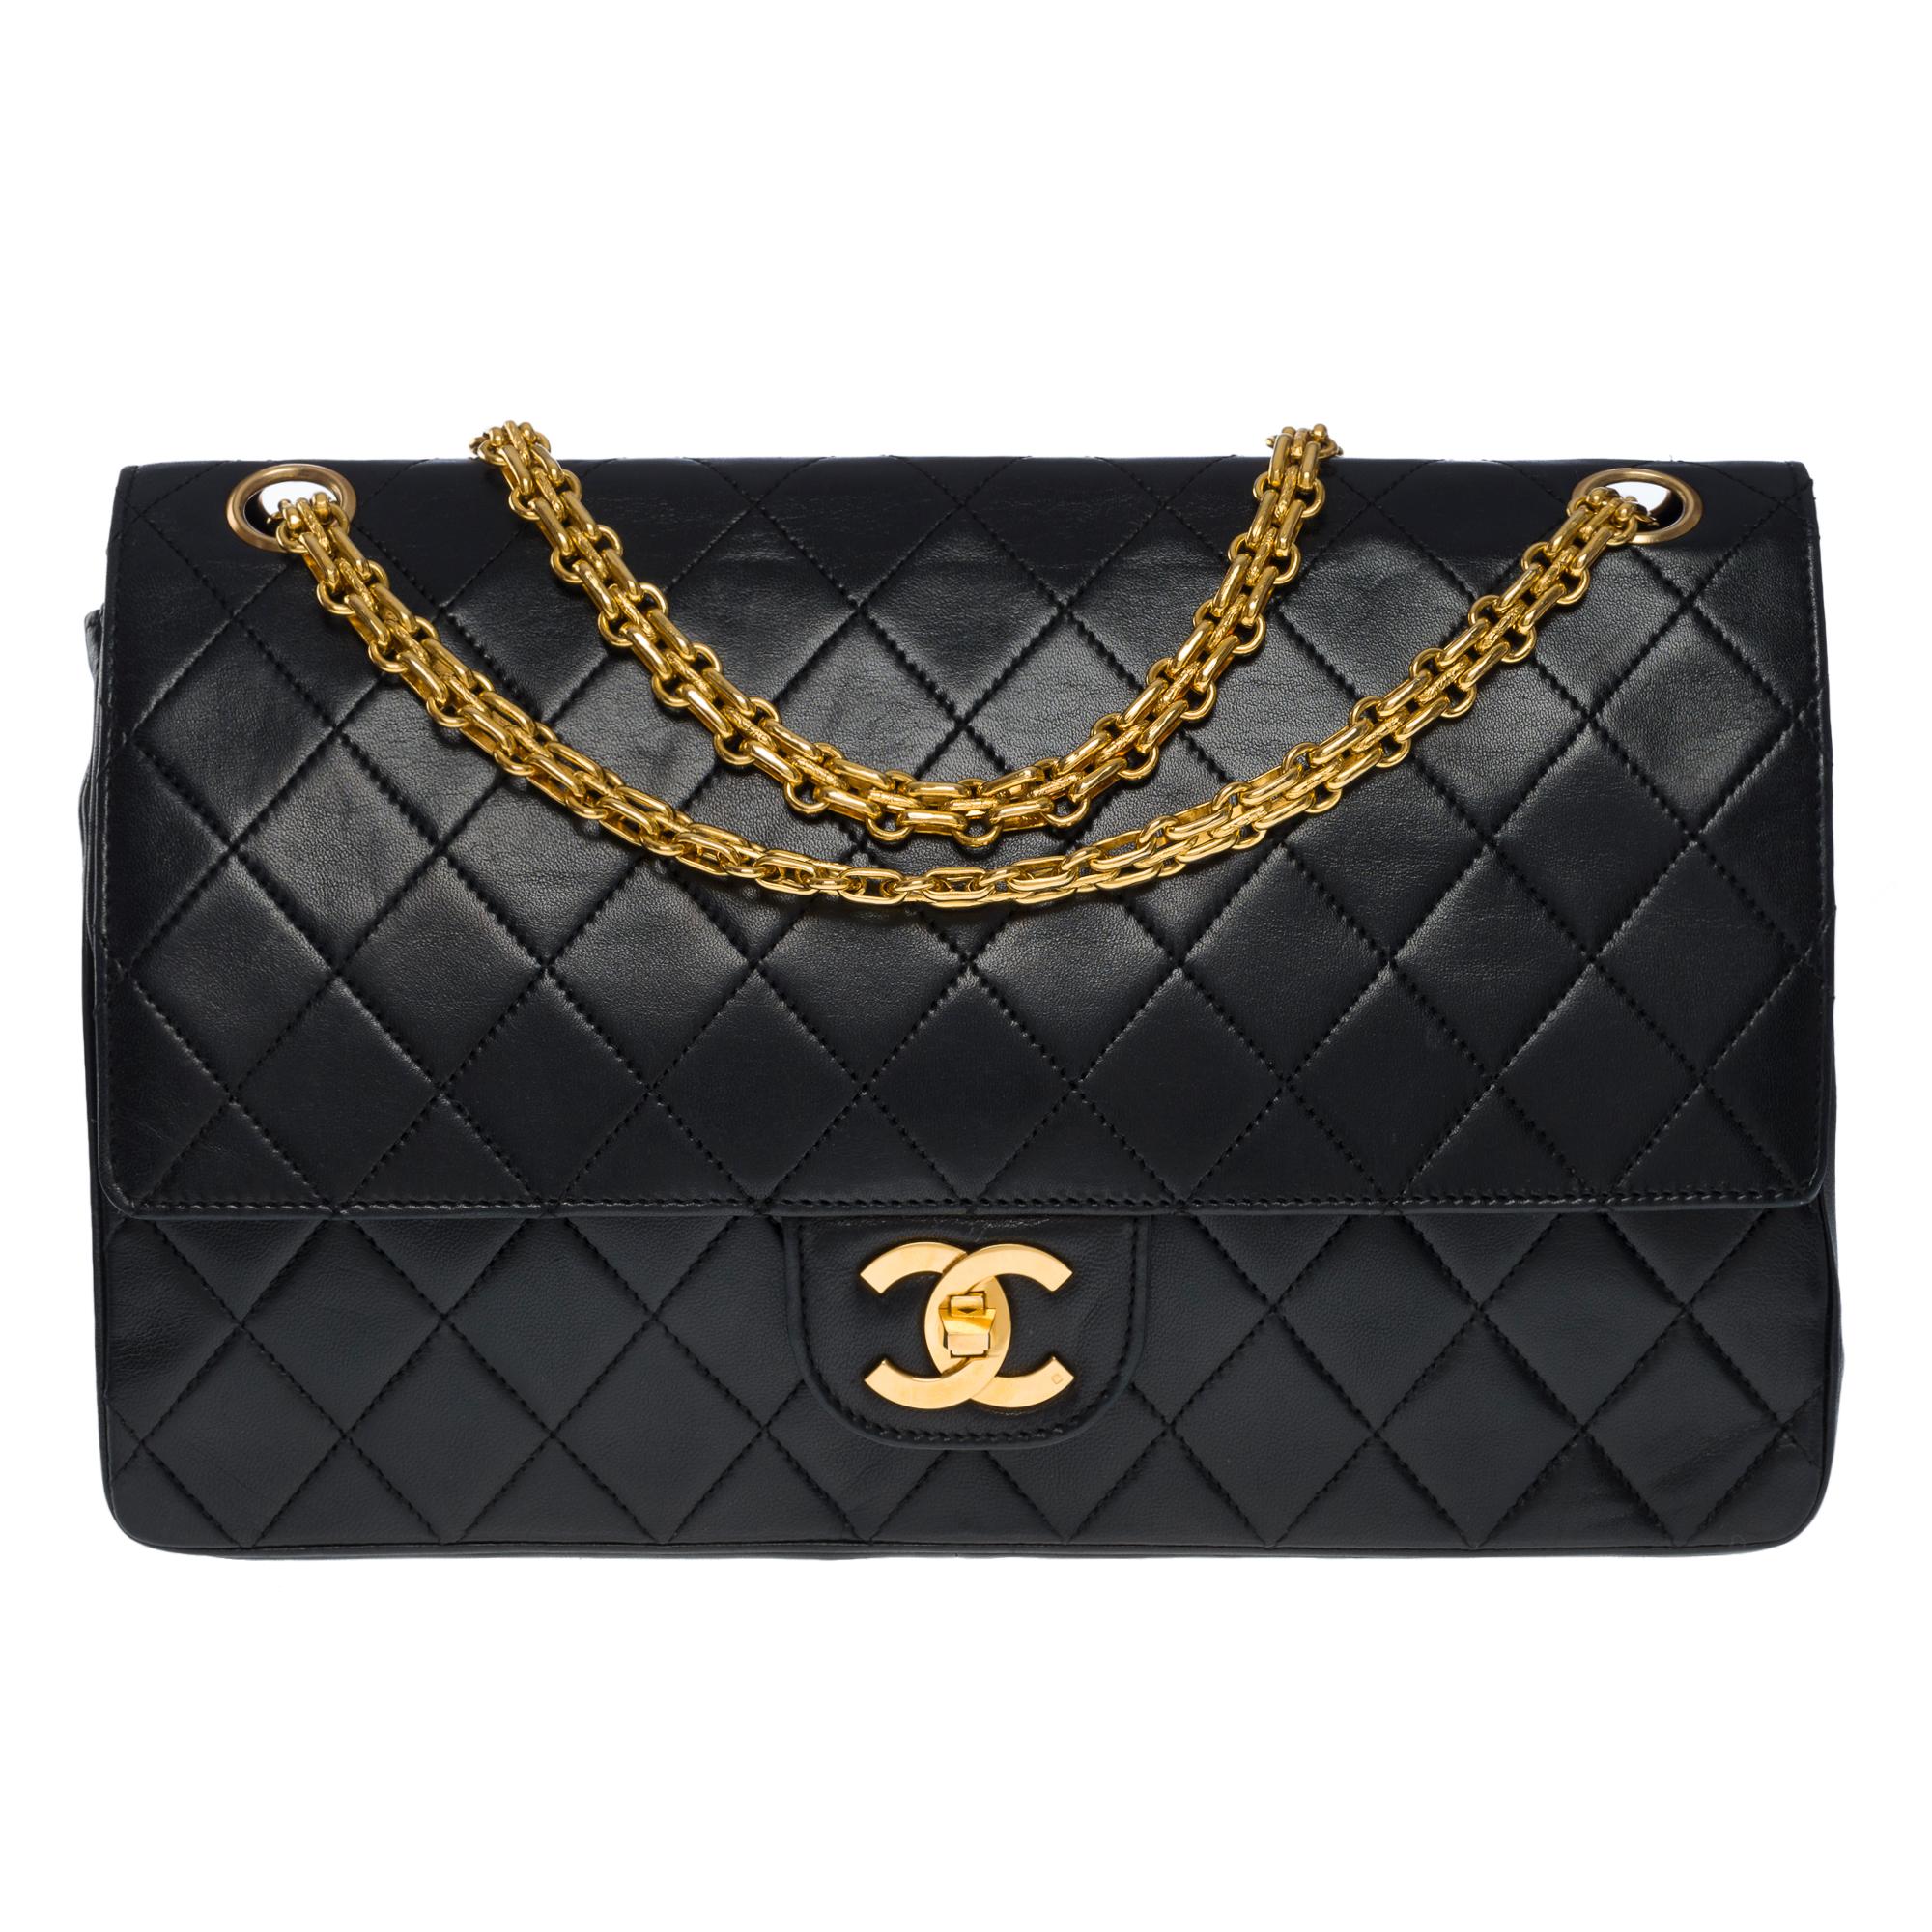 Beautiful Chanel Timeless/Classic 27 cm double flap shoulder bag in black quilted lambskin, gold metal hardware, a Mademoiselle gold metal chain handle for a shoulder and crossbody carry
Backpack pocket
Closure by flap, Mademoiselle clasp signed CC